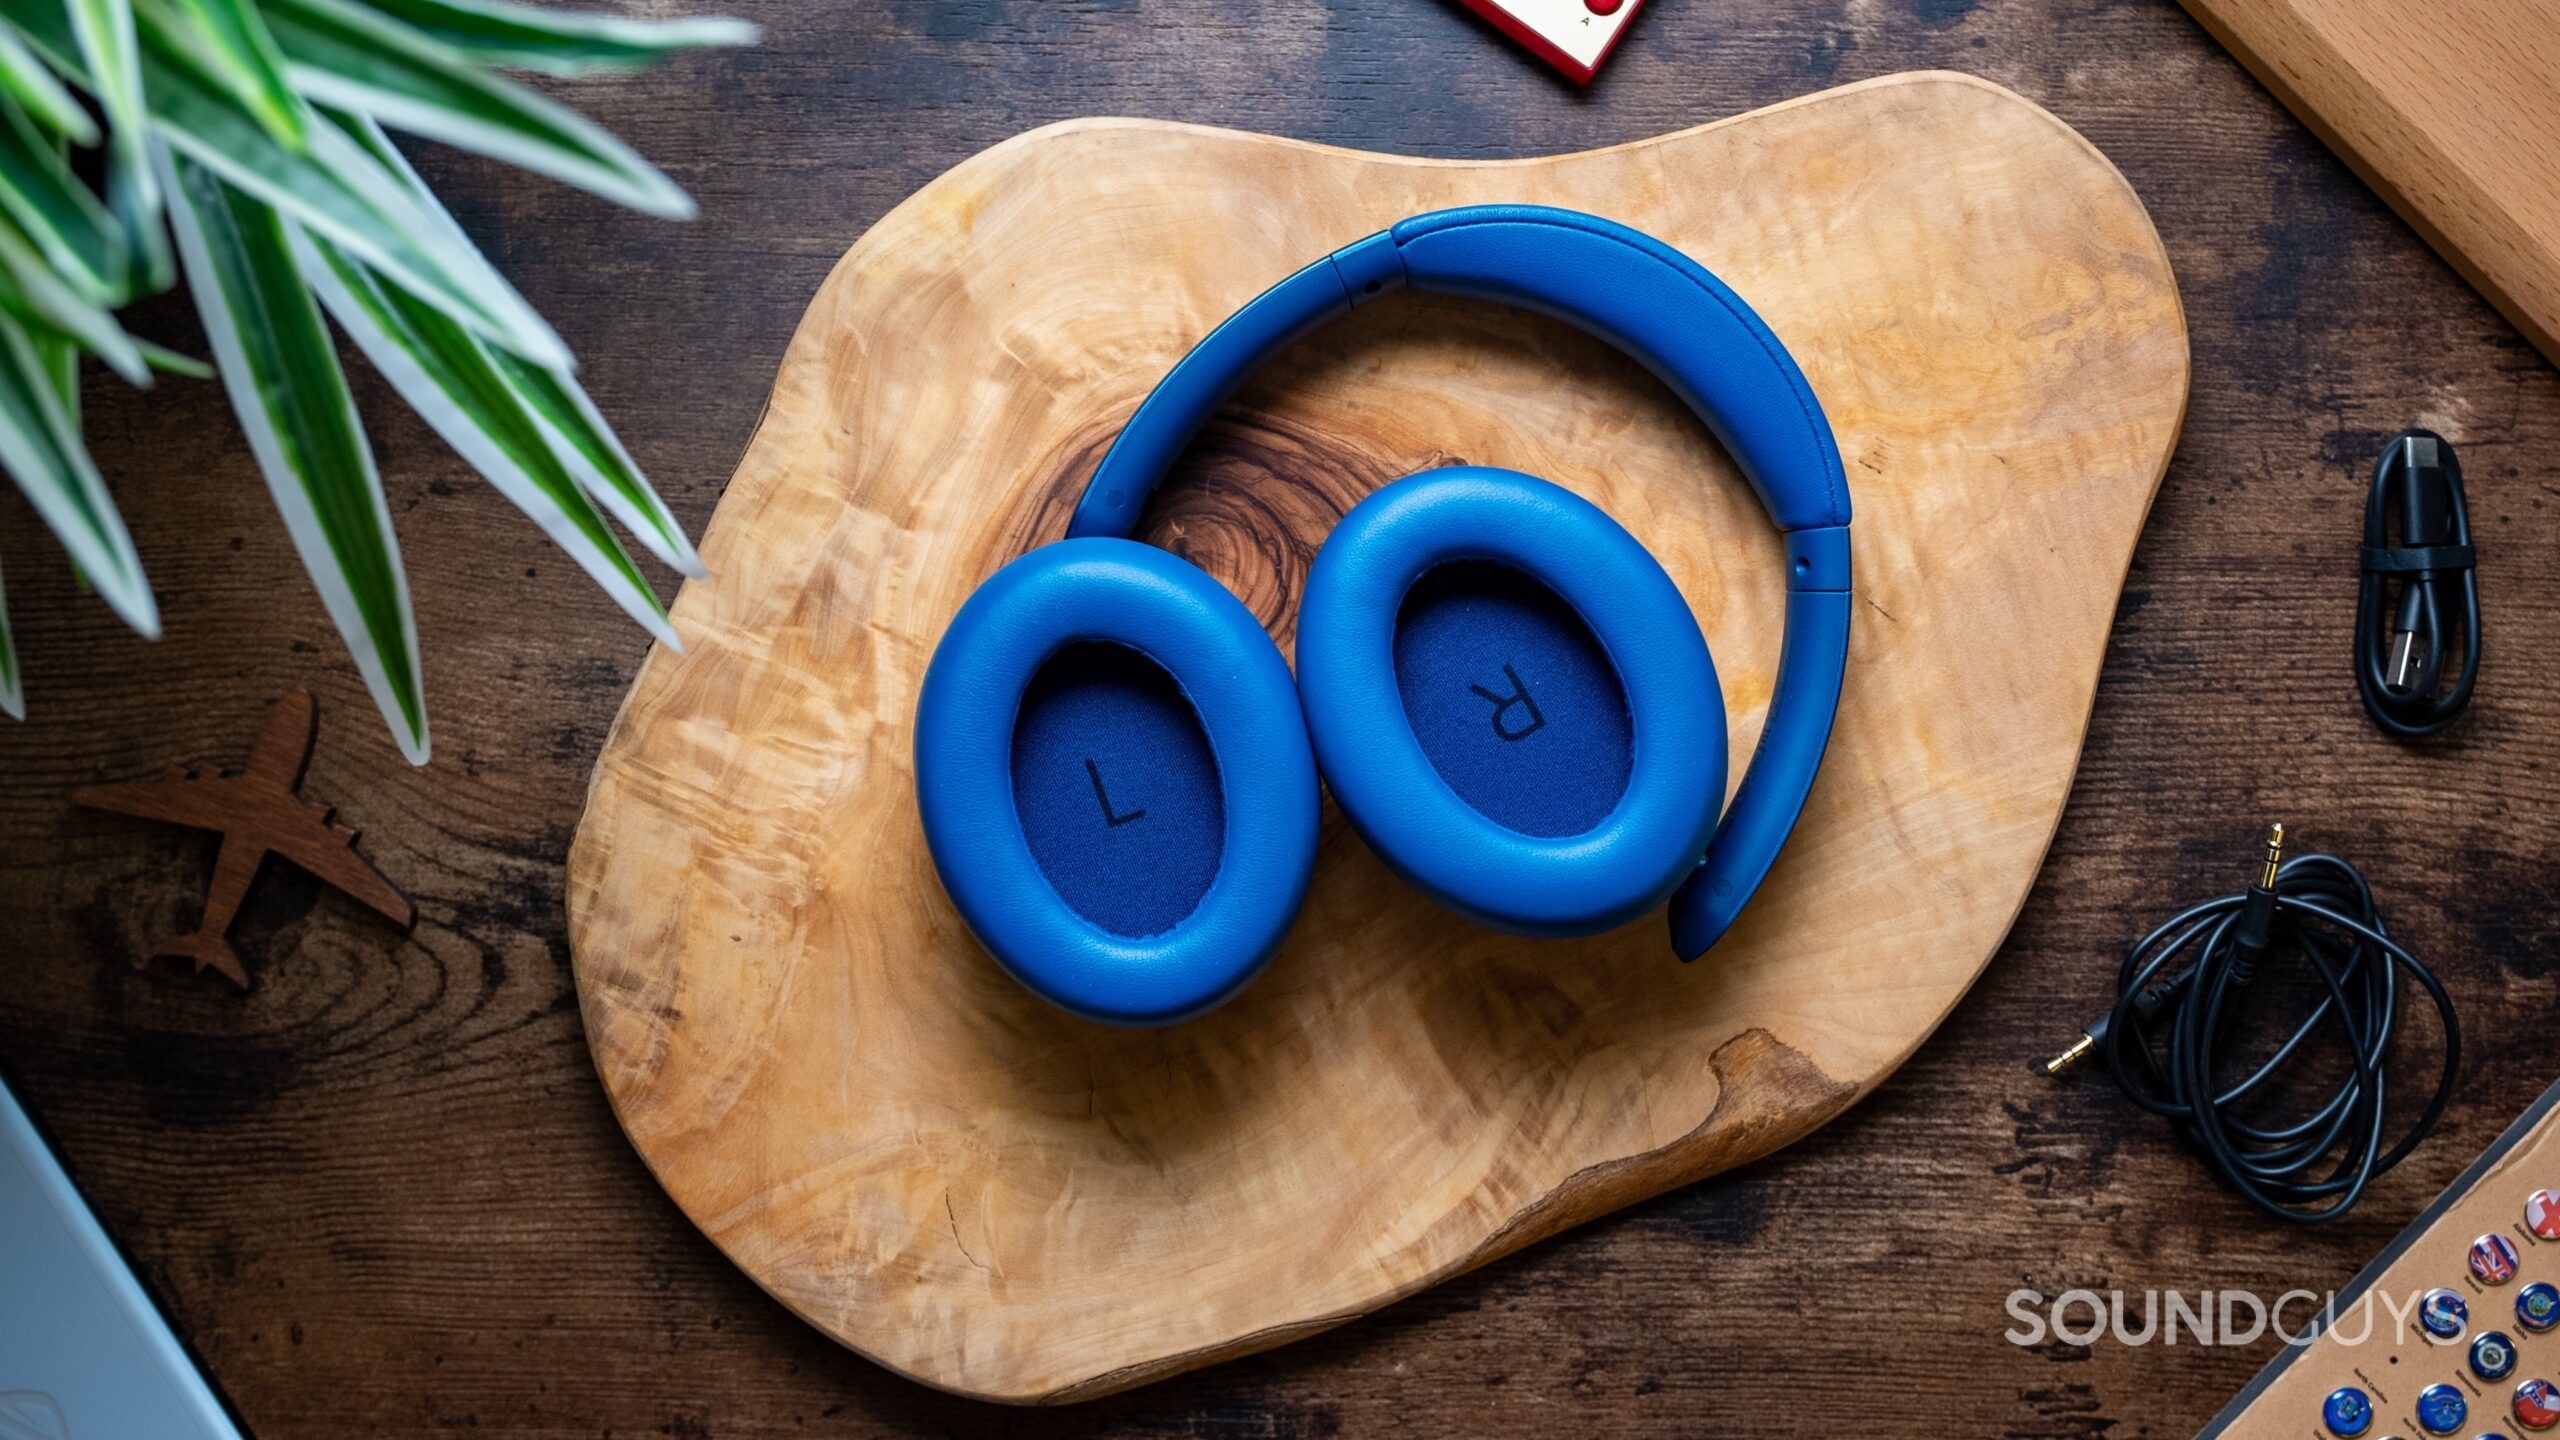 Top view showing the SonoFlow Headphones inner ear pads slightly folded